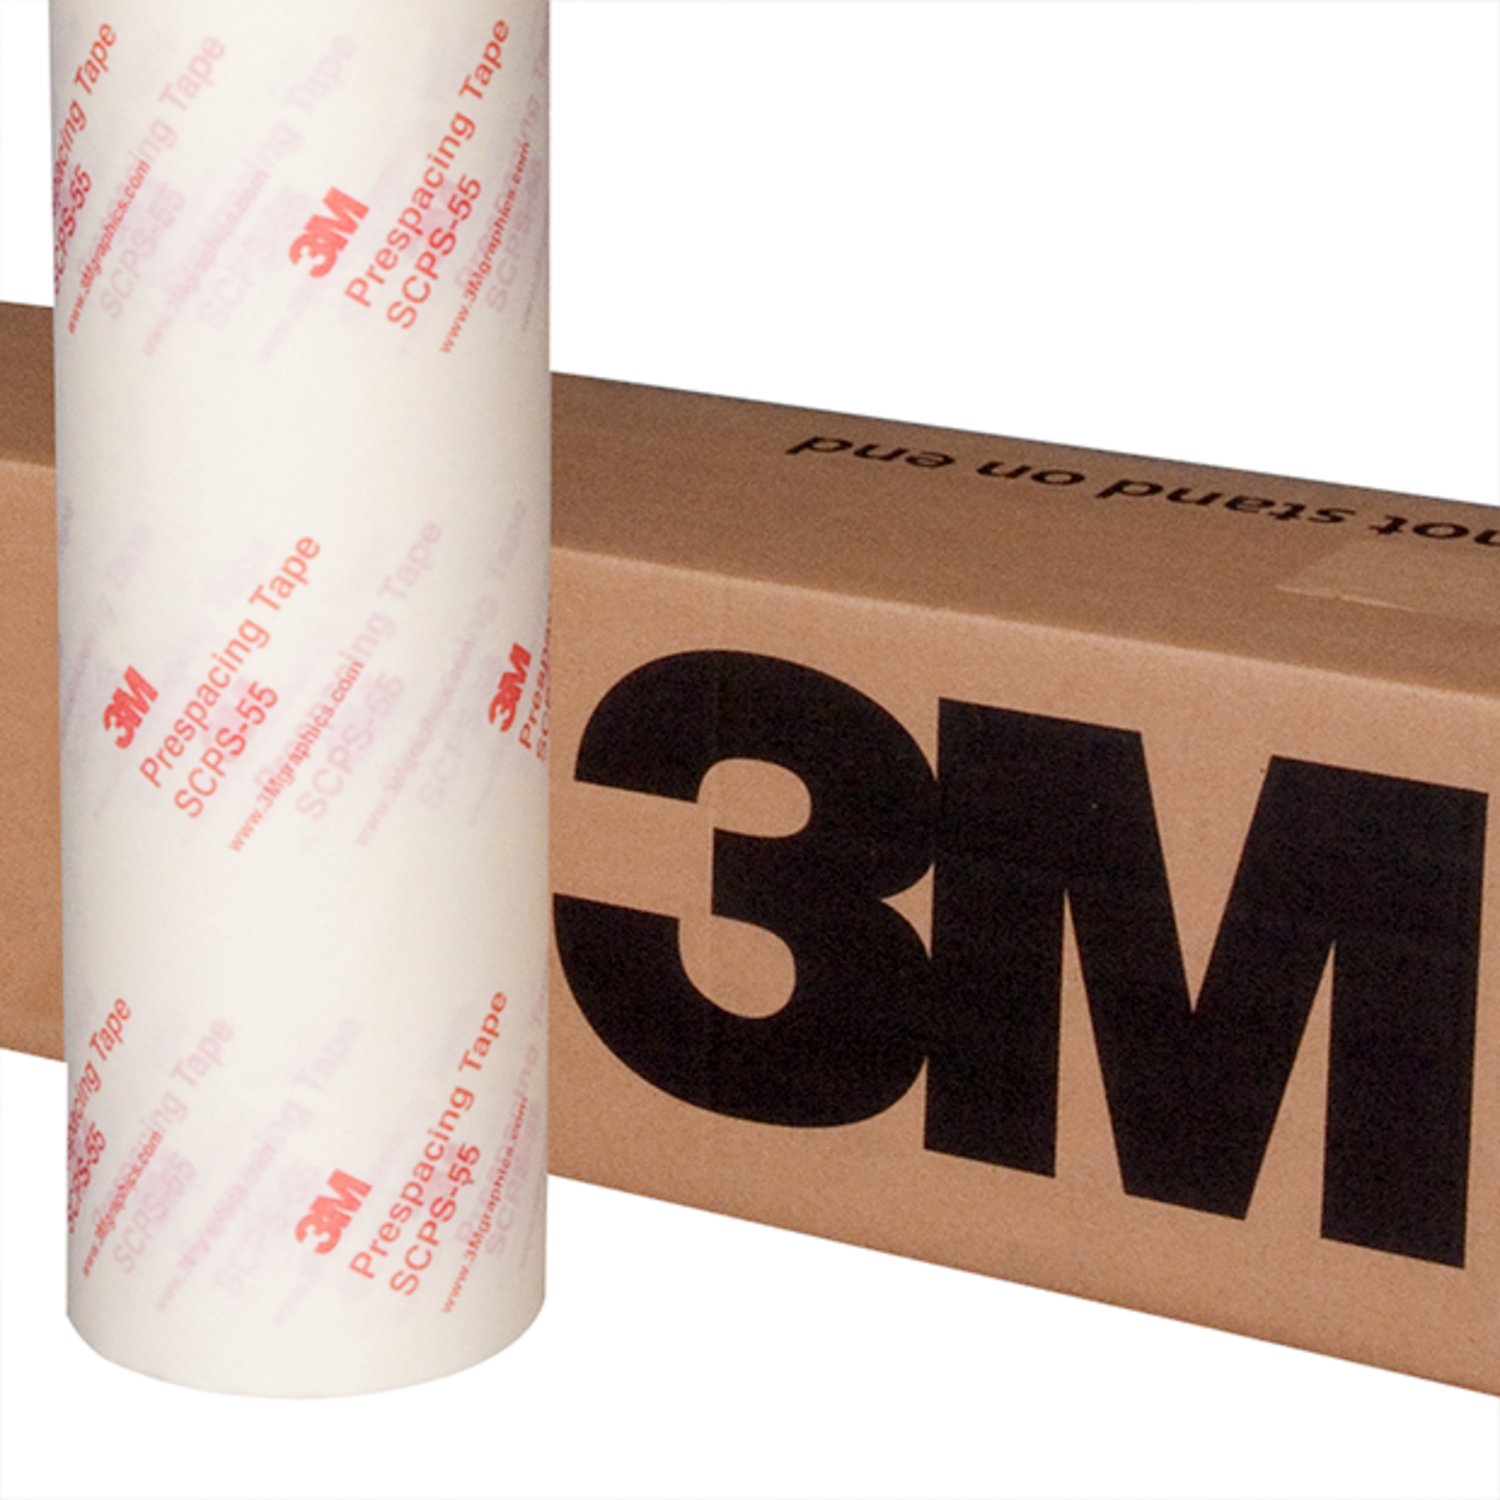 7000130180 - 3M Prespacing Tape SCPS-55, 36 in x 100 yd, 1 Roll/Case